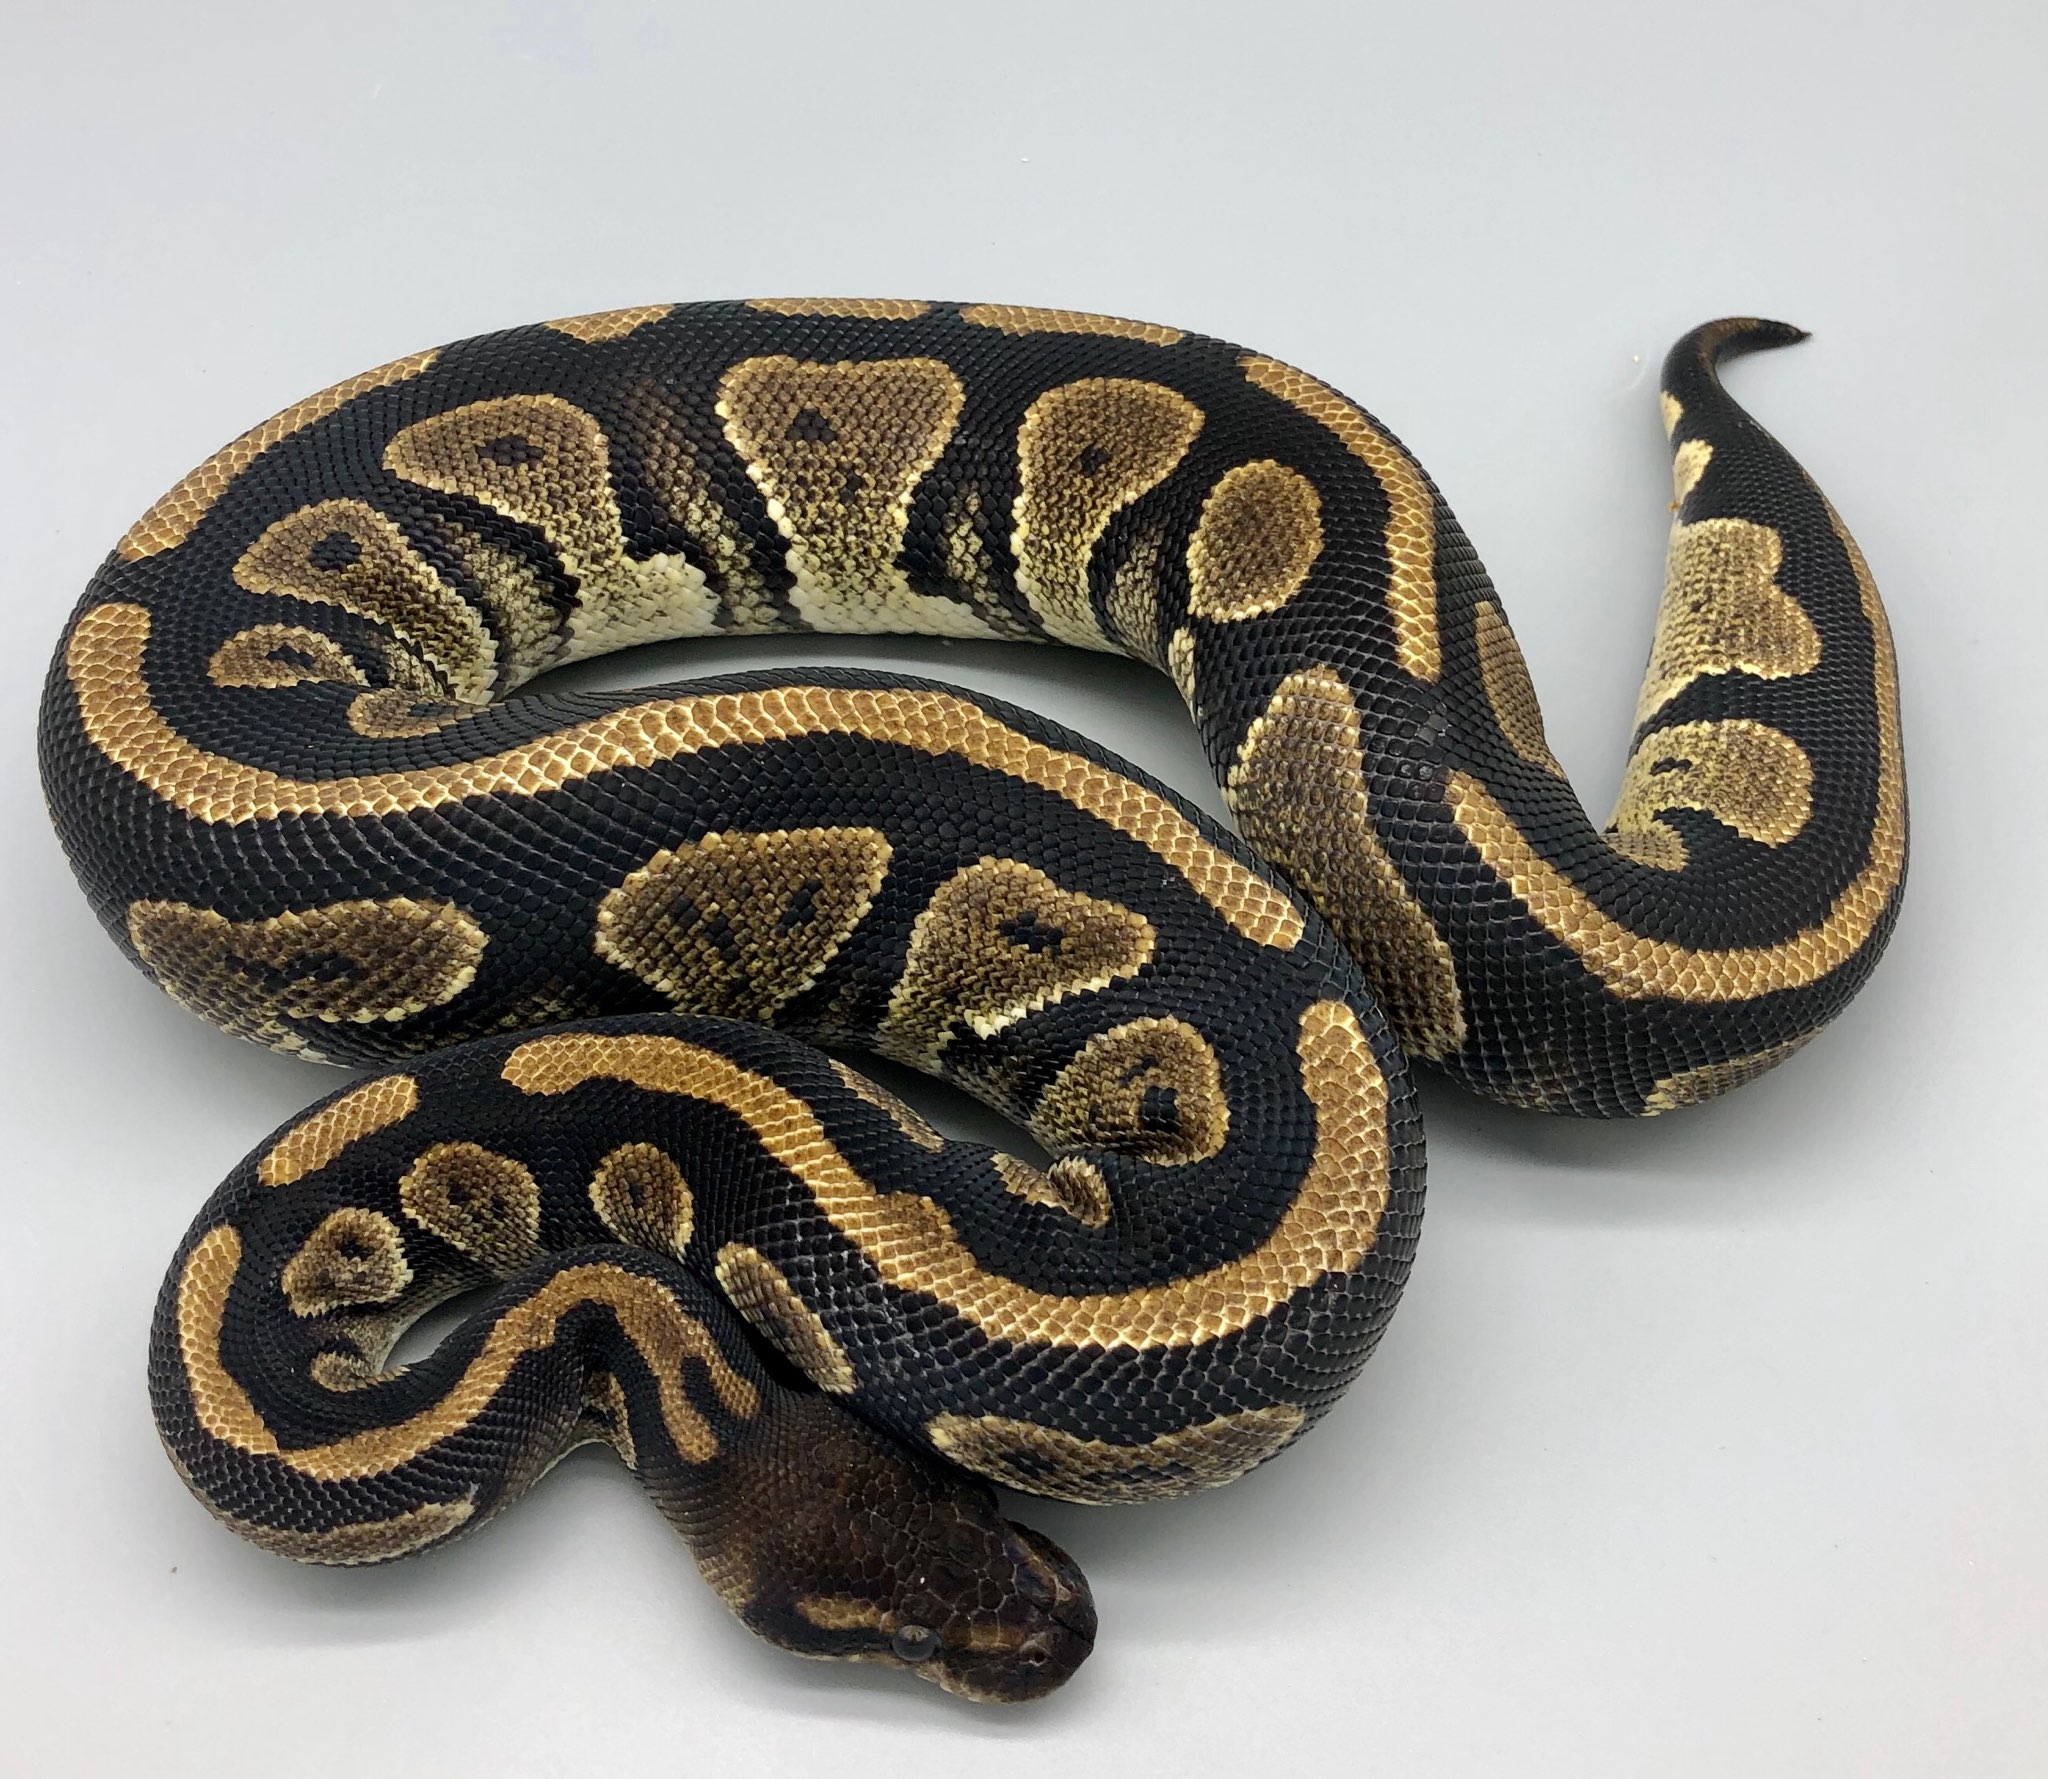 Cinder Ball Python by Herps Etc Reptiles